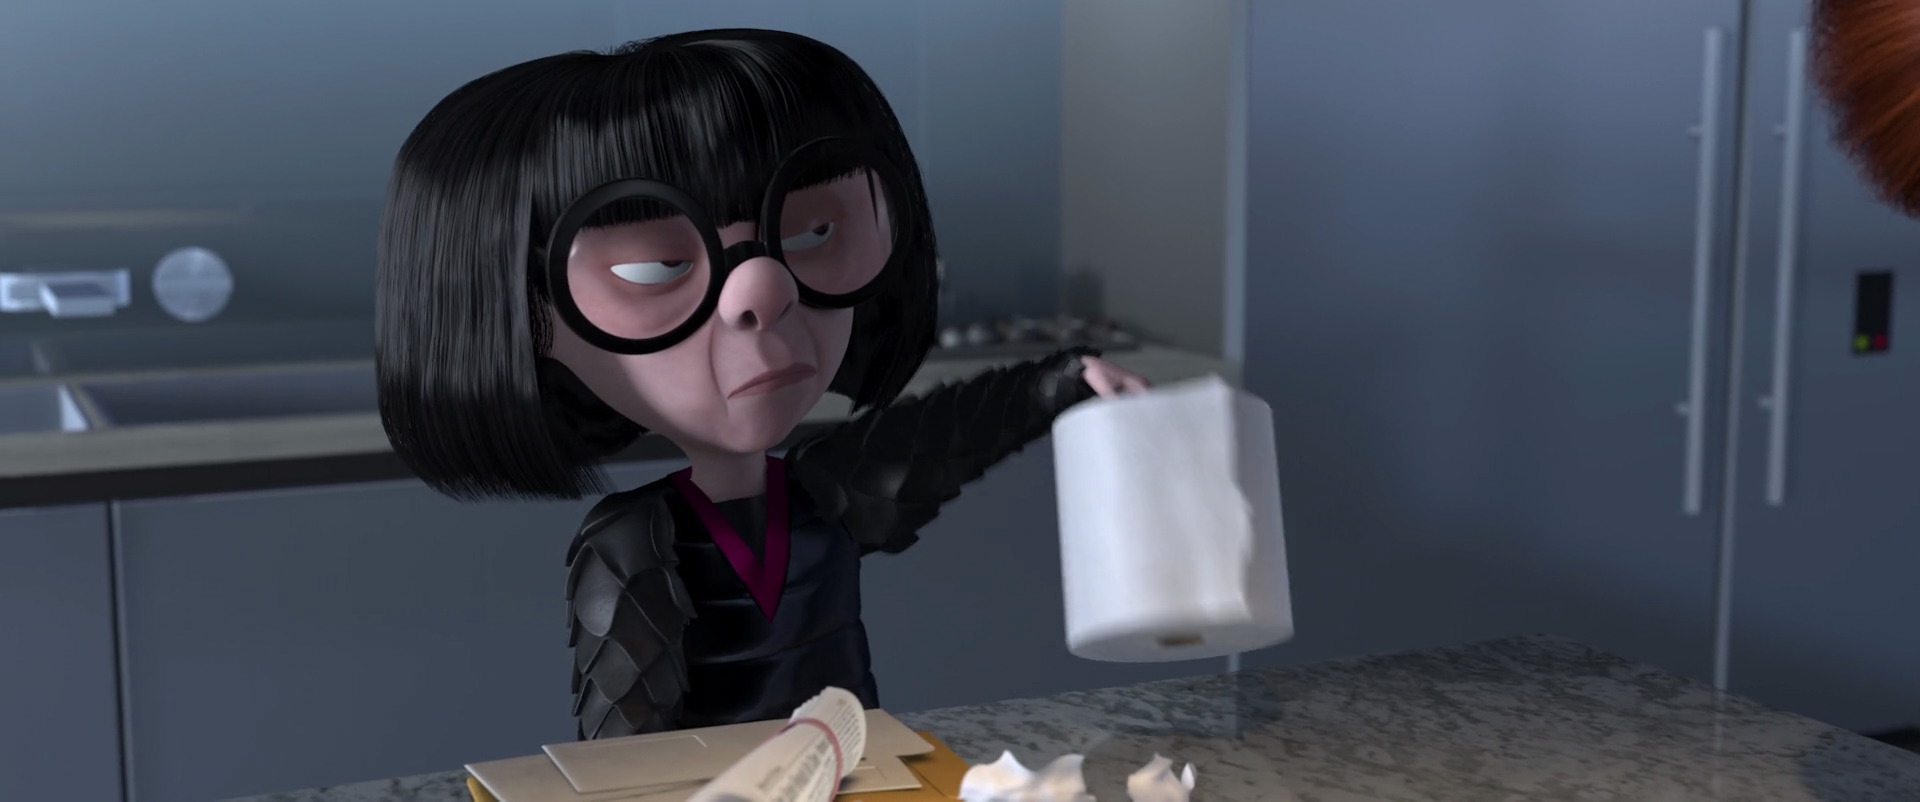 Edna Mode is one of the famous Disney characters with glasses